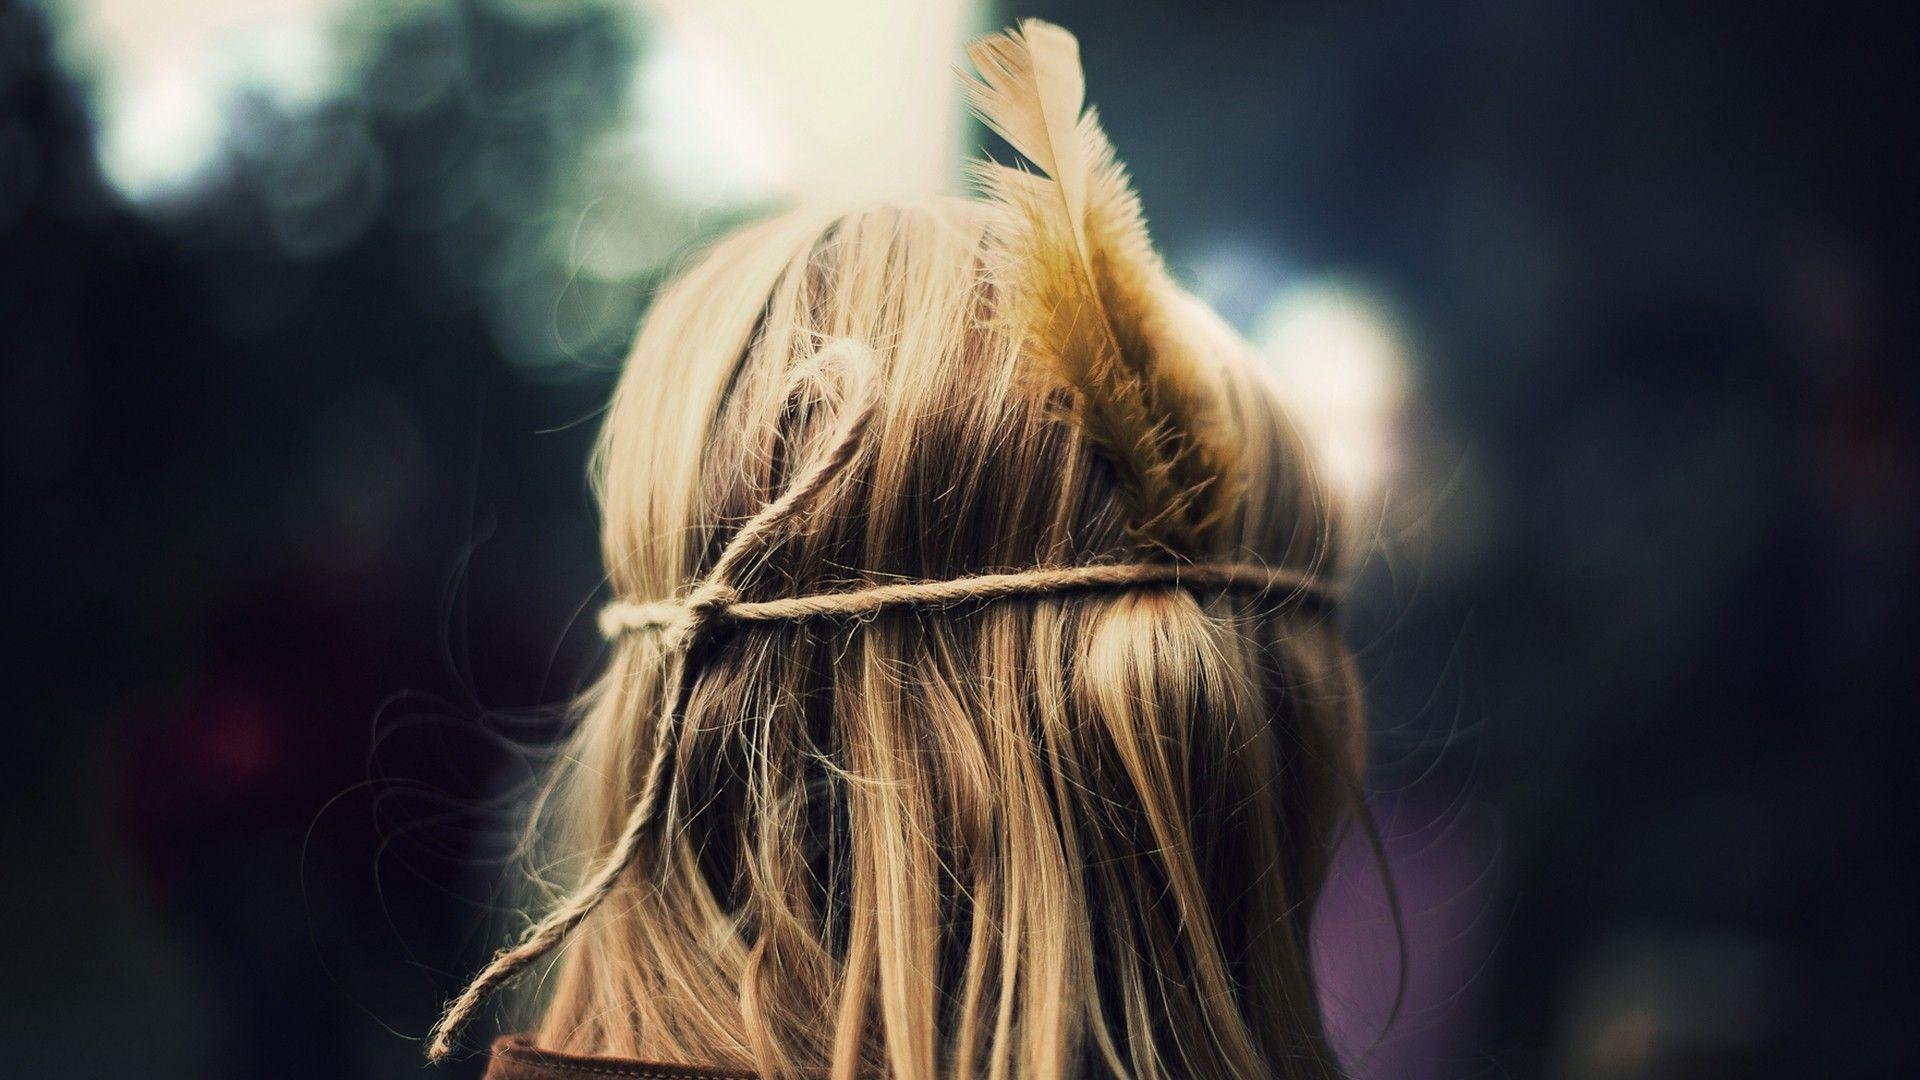 Hippie hairstyle Wallpaper Image. HD Wallpaper Image